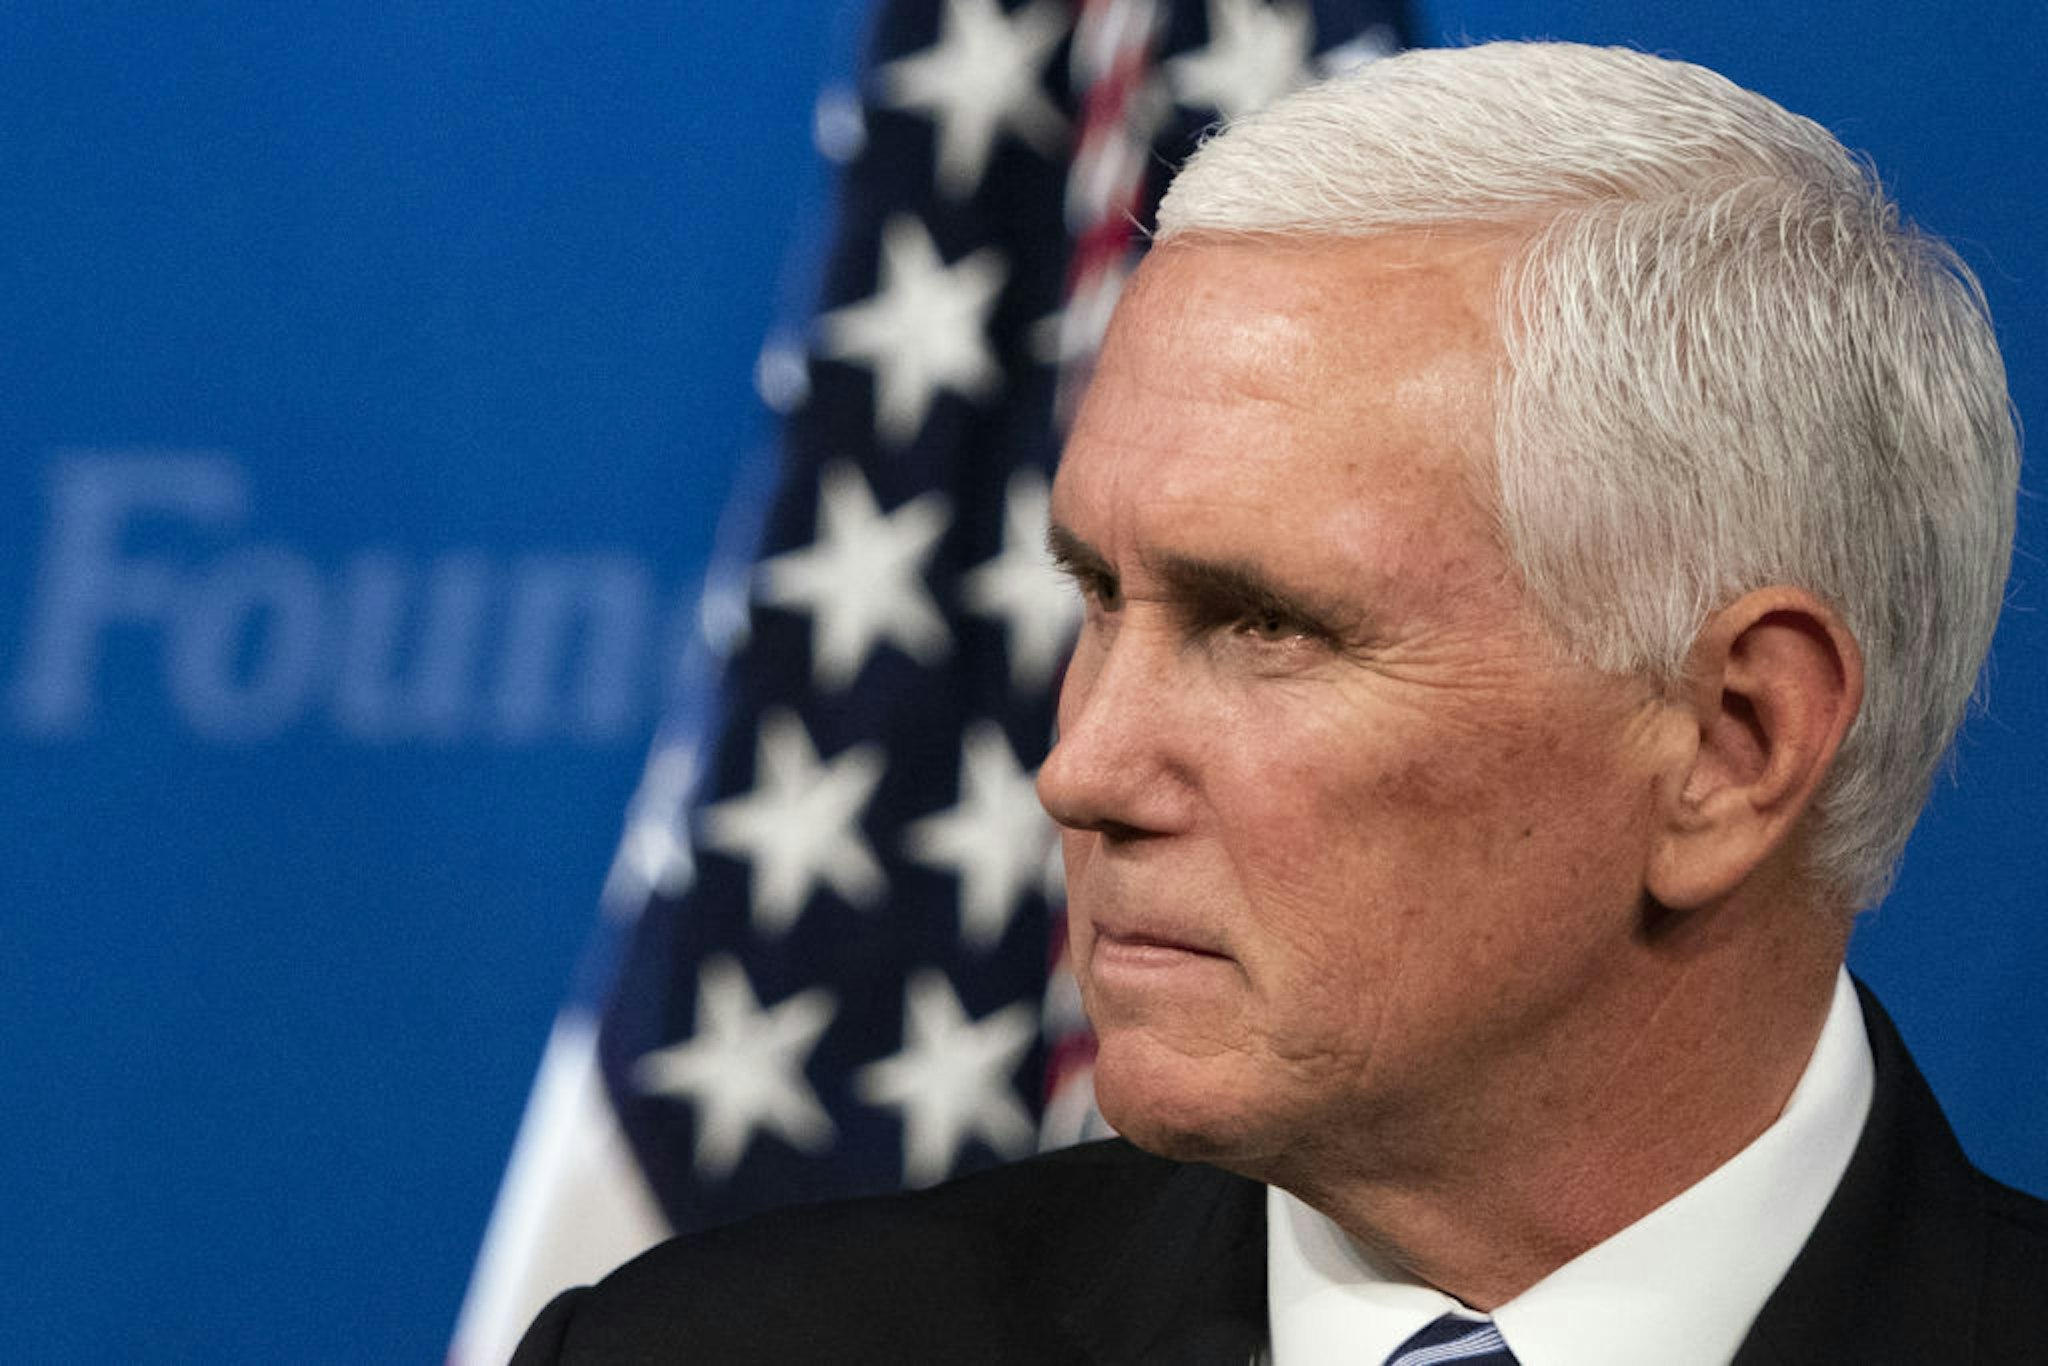 U.S. Vice President Mike Pence pauses while speaking during an event on USMCA trade policy at the Heritage Foundation in Washington, D.C., U.S., on Tuesday, Sept. 17, 2019.